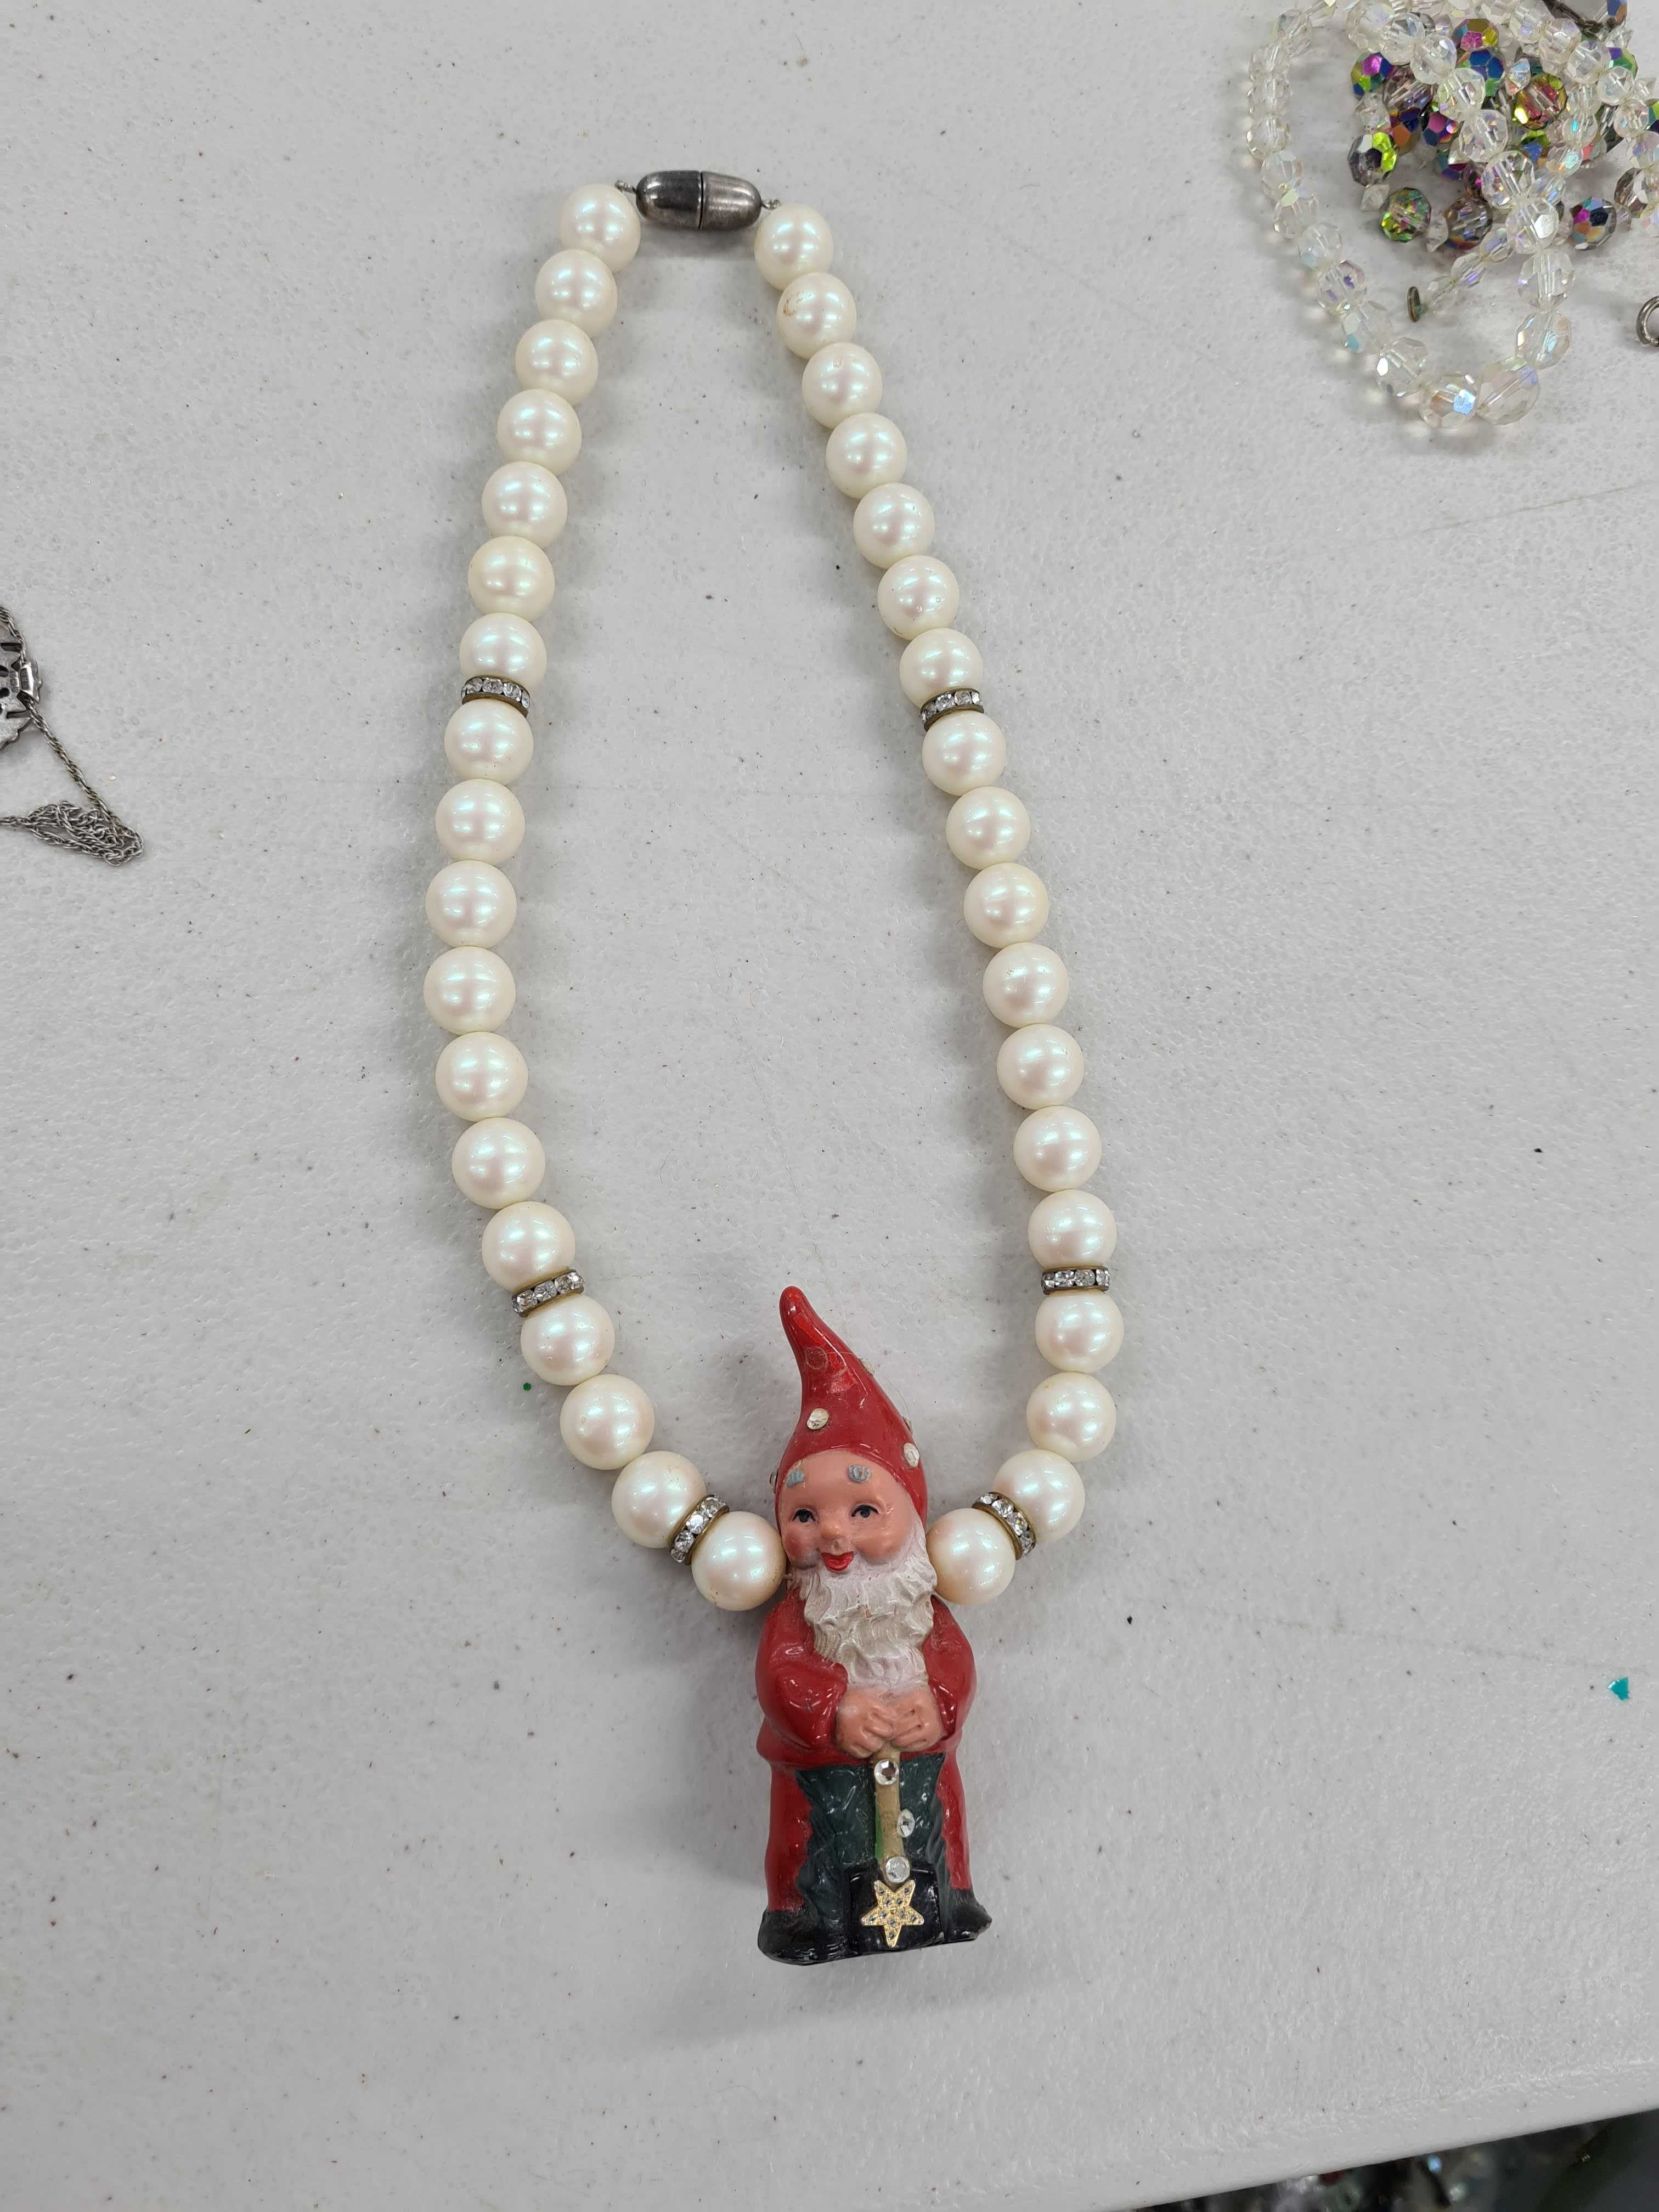 Gnome necklace